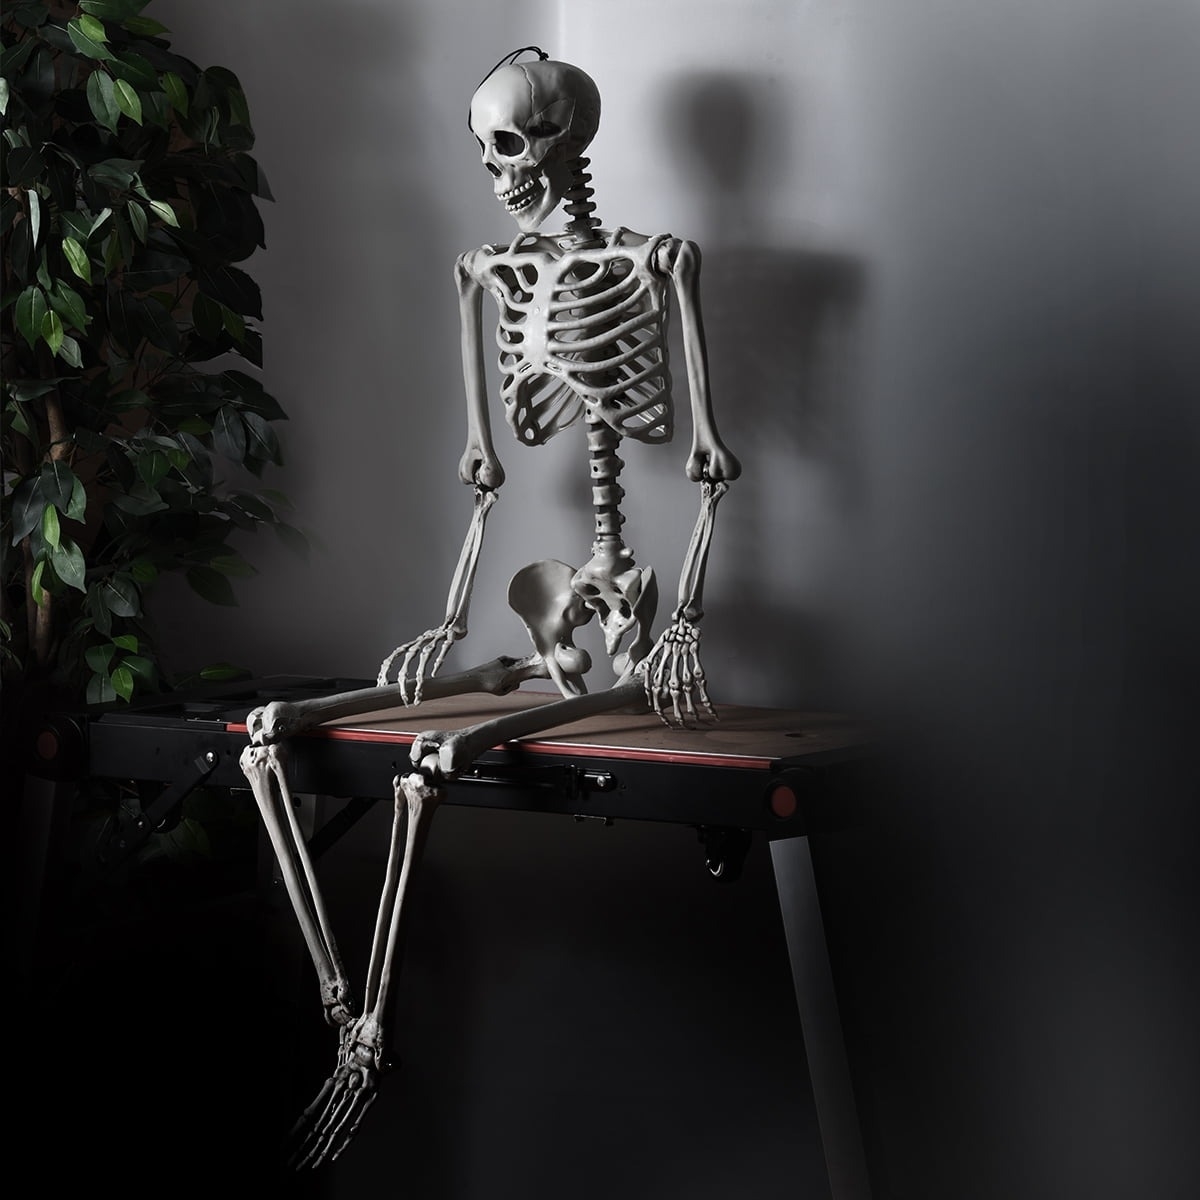 the skeleton sitting on a bench